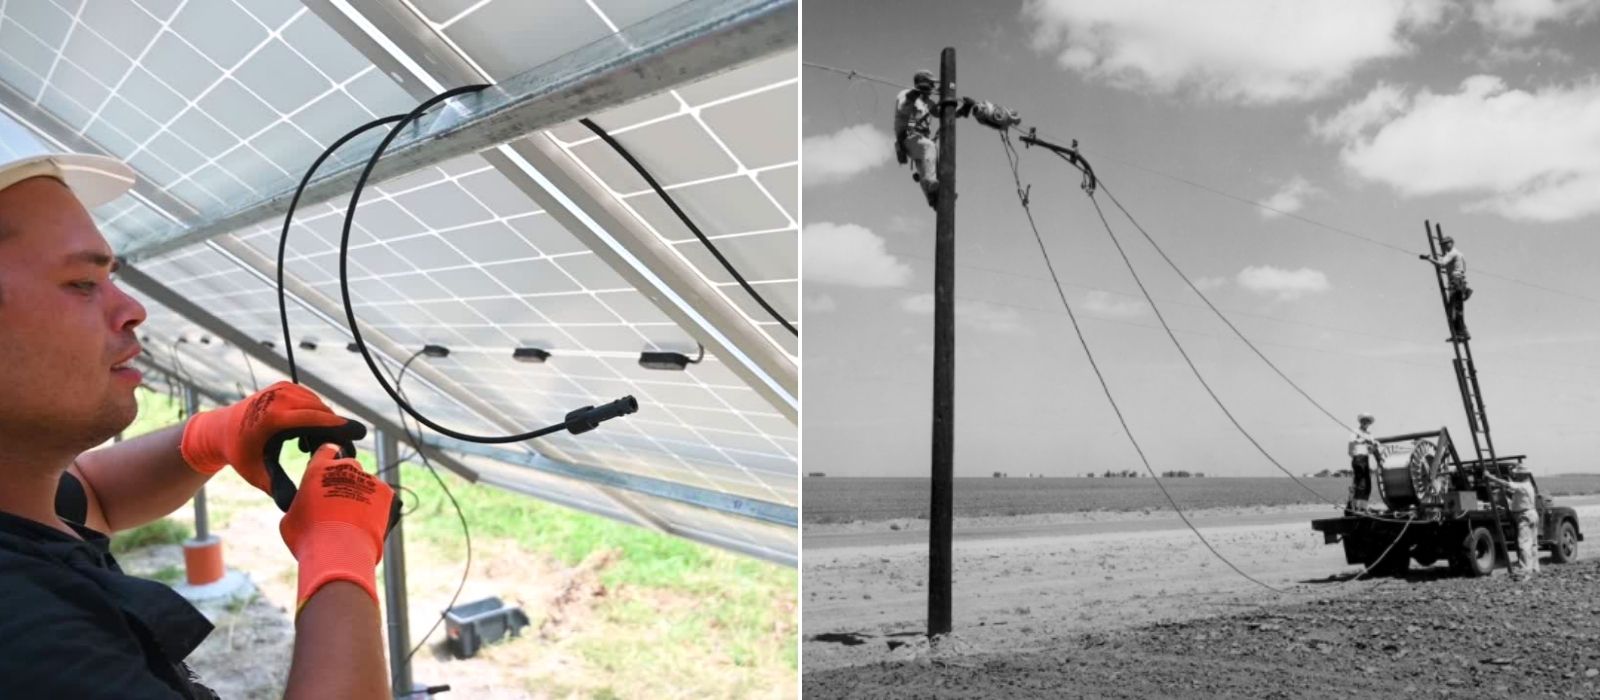 Top image is a man wiring a solar panel; the bottom image is black and white featuring rural electric co-op linemen stringing powerlines as part of the rural electrification act.